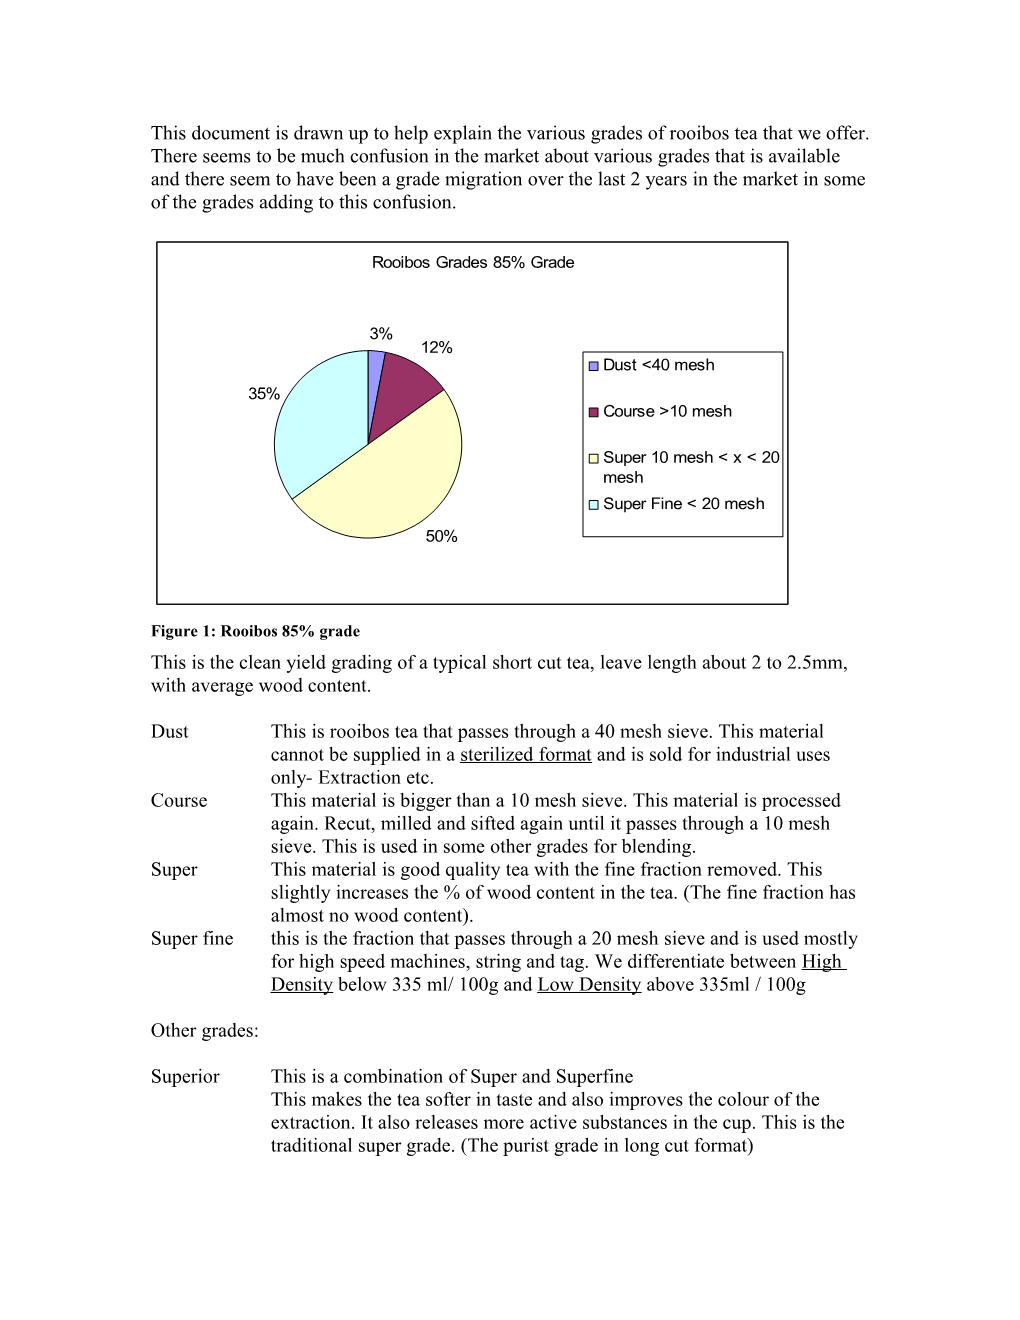 This Document Is Drawn up to Help Explain the Various Grades of Rooibos Tea That We Offer